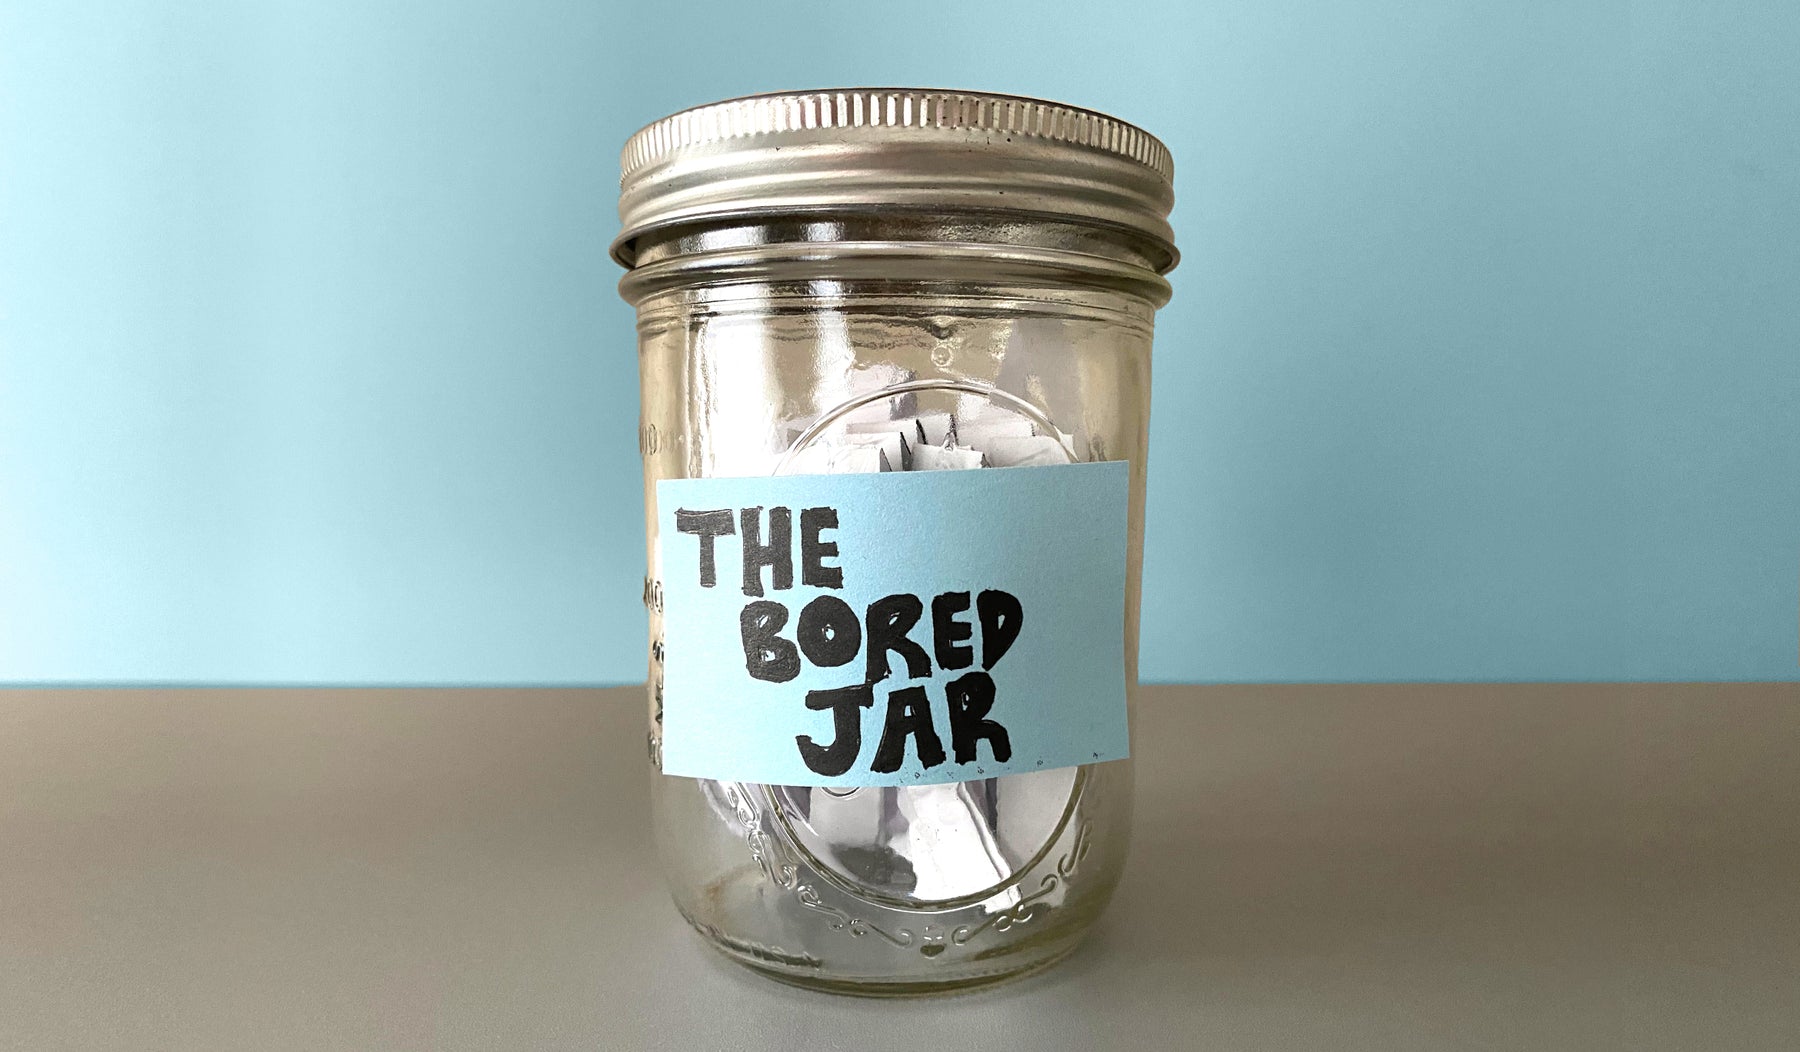 Kids are Bored? Meet the Bored Jar